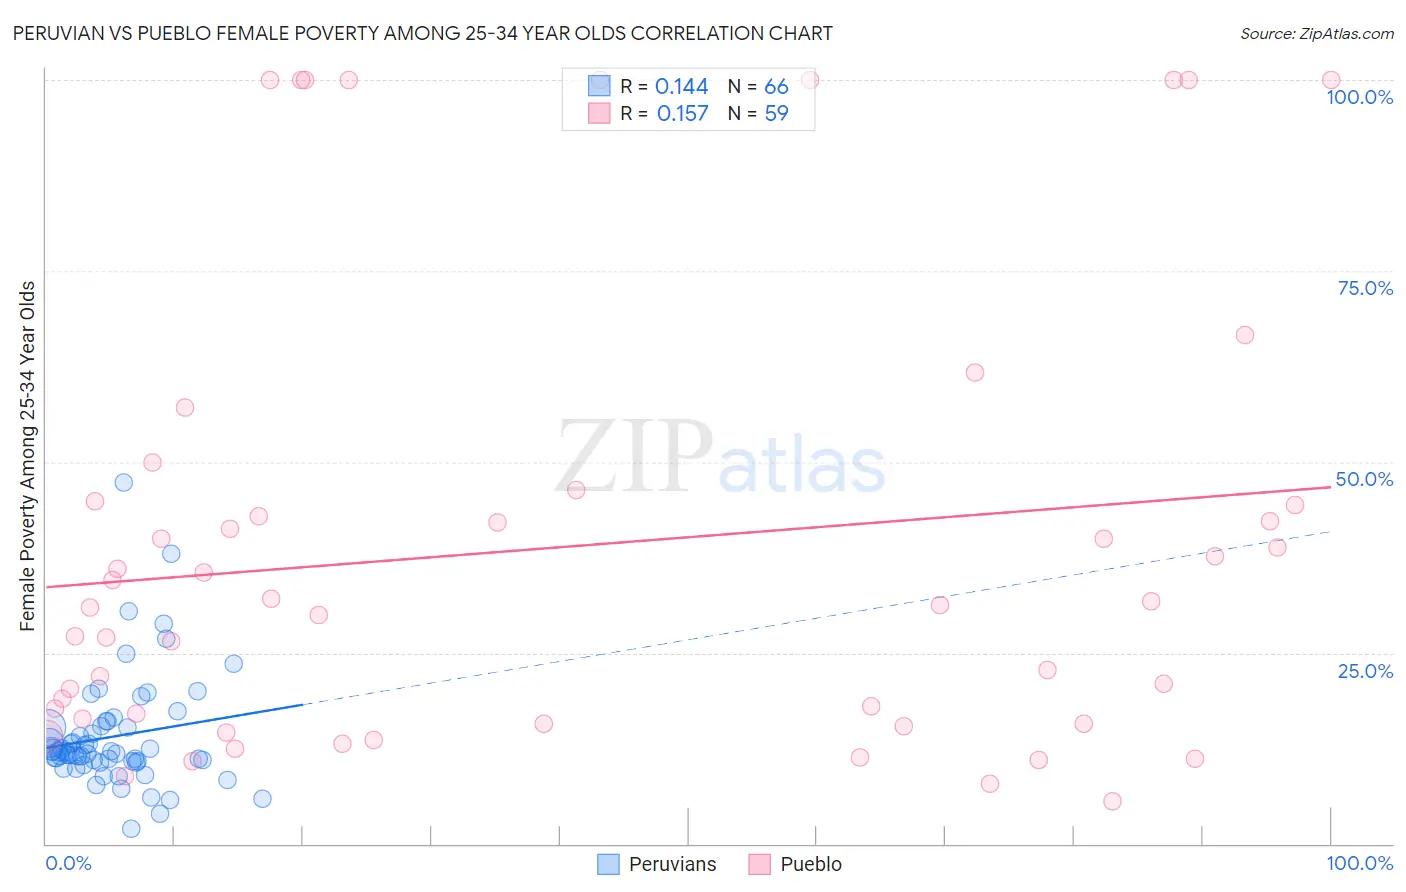 Peruvian vs Pueblo Female Poverty Among 25-34 Year Olds